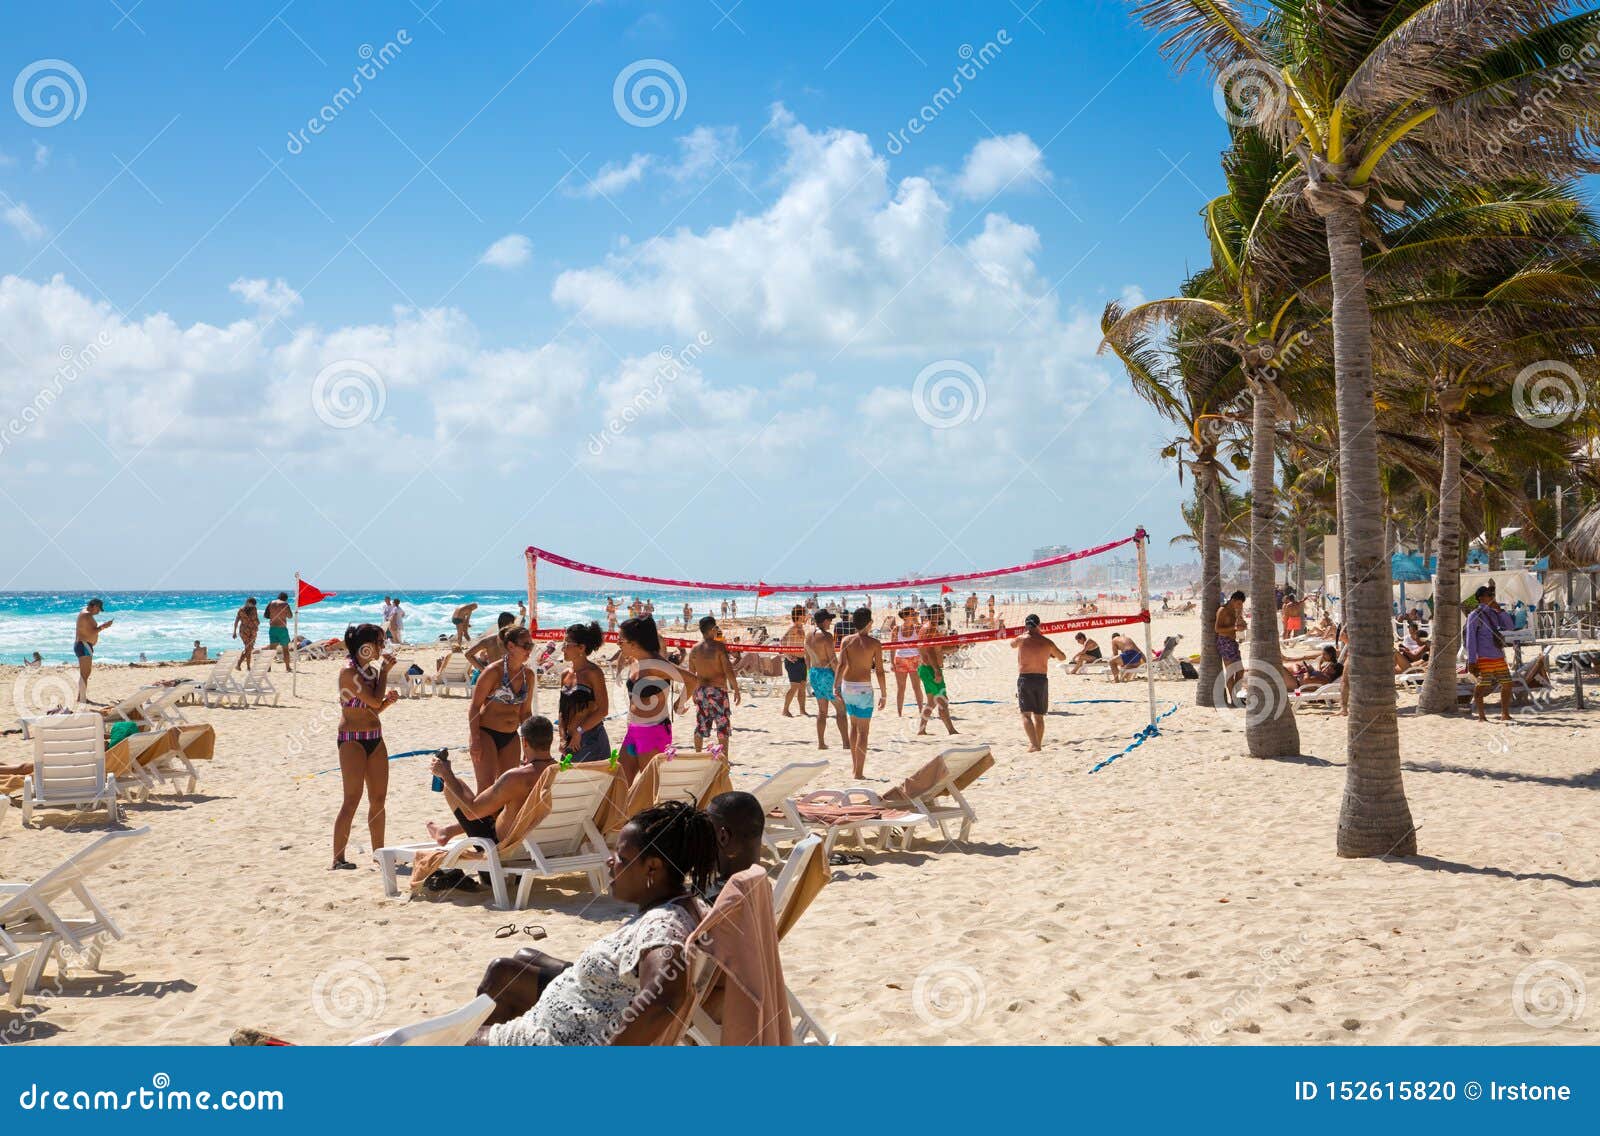 Mexico, Cancun. Group of Young People Relaxing, Playing and 